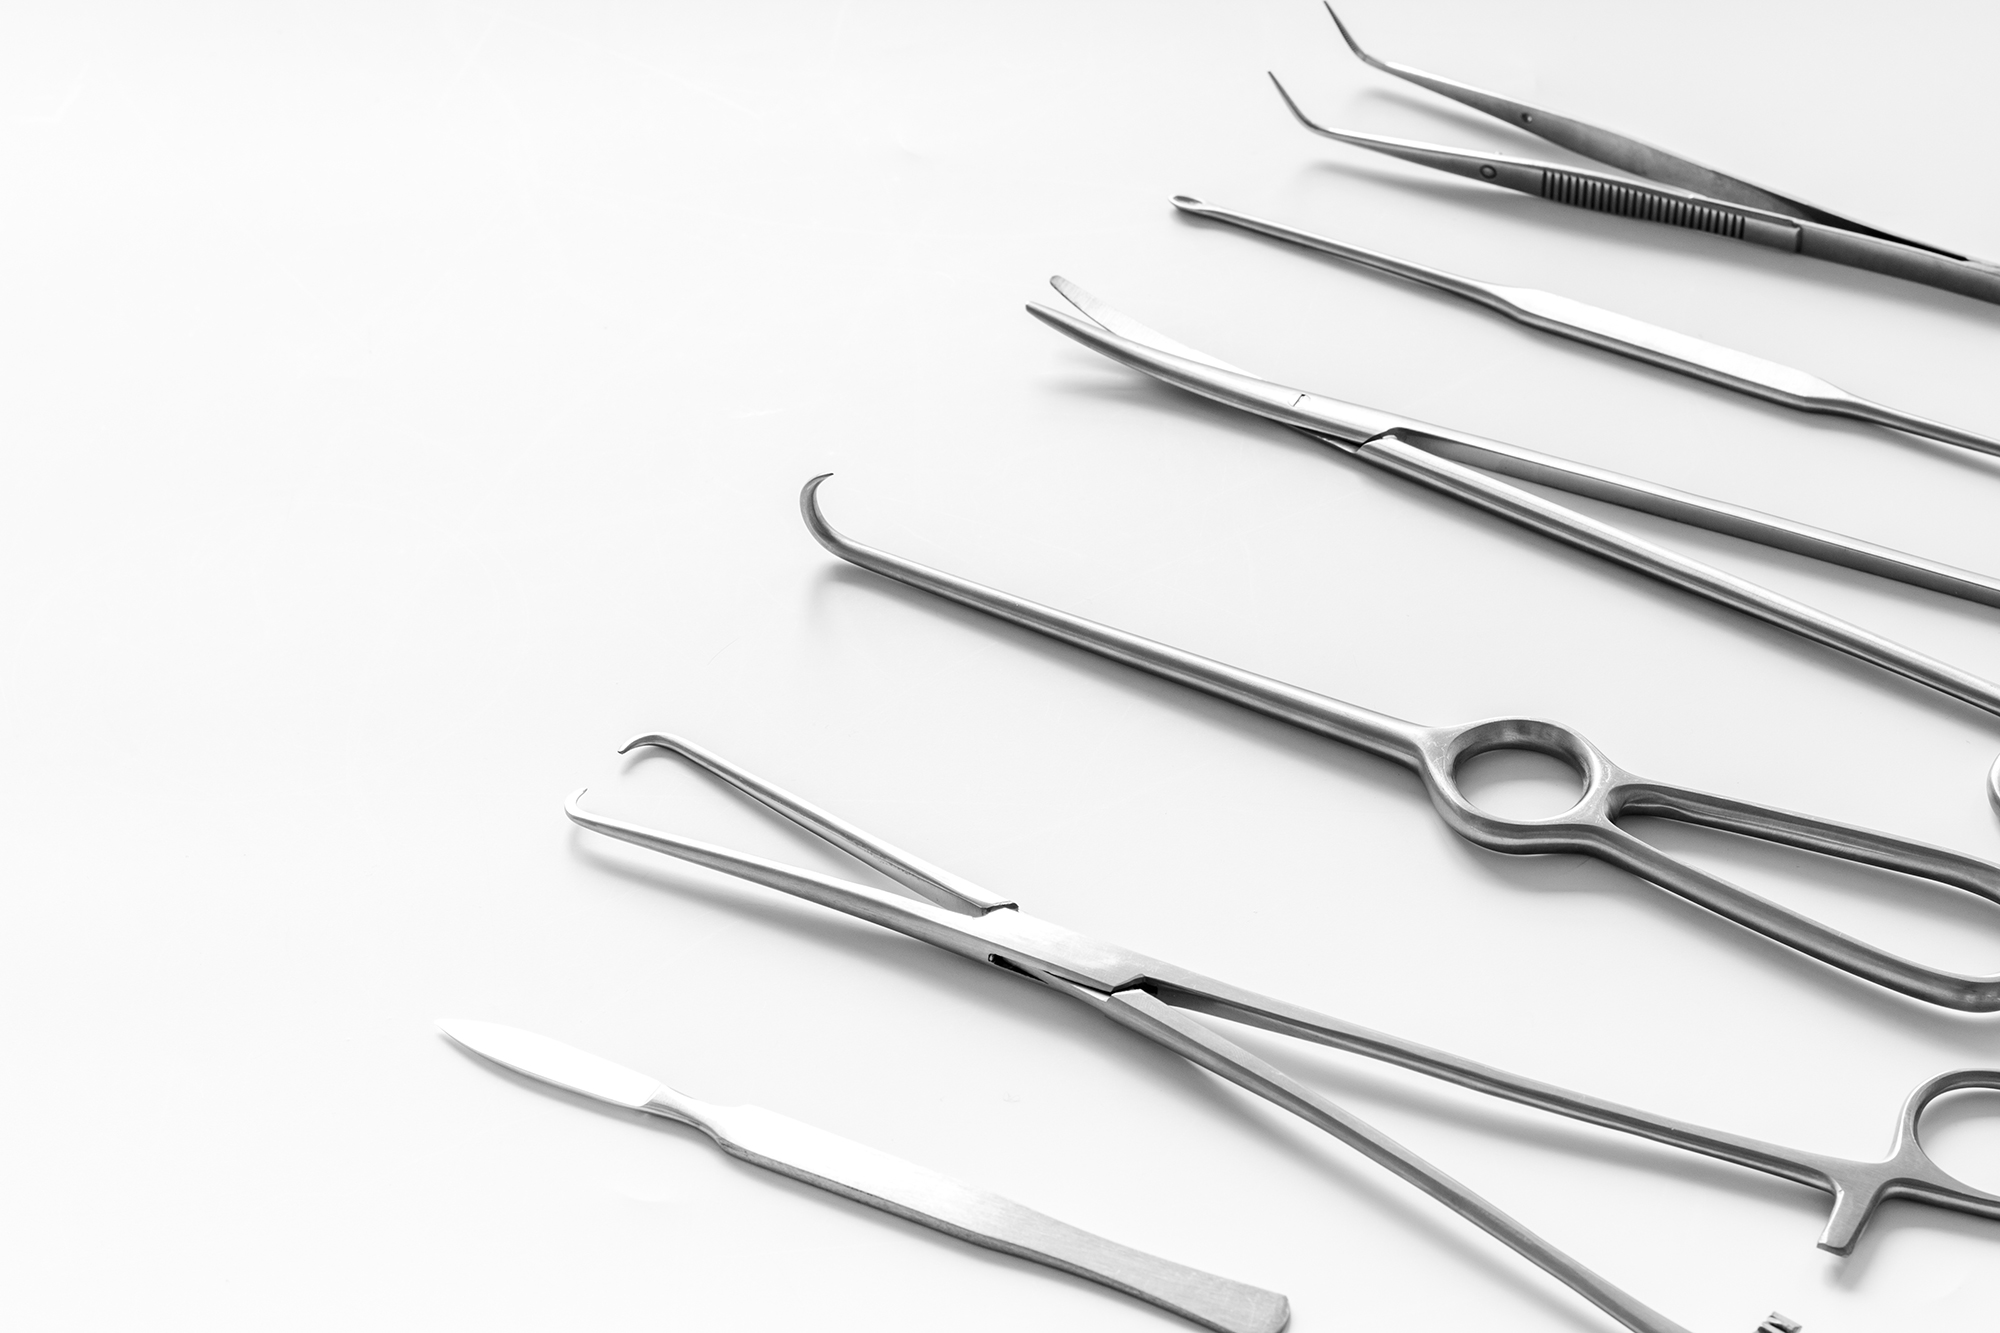 Surgical instrument IFU validation requirements